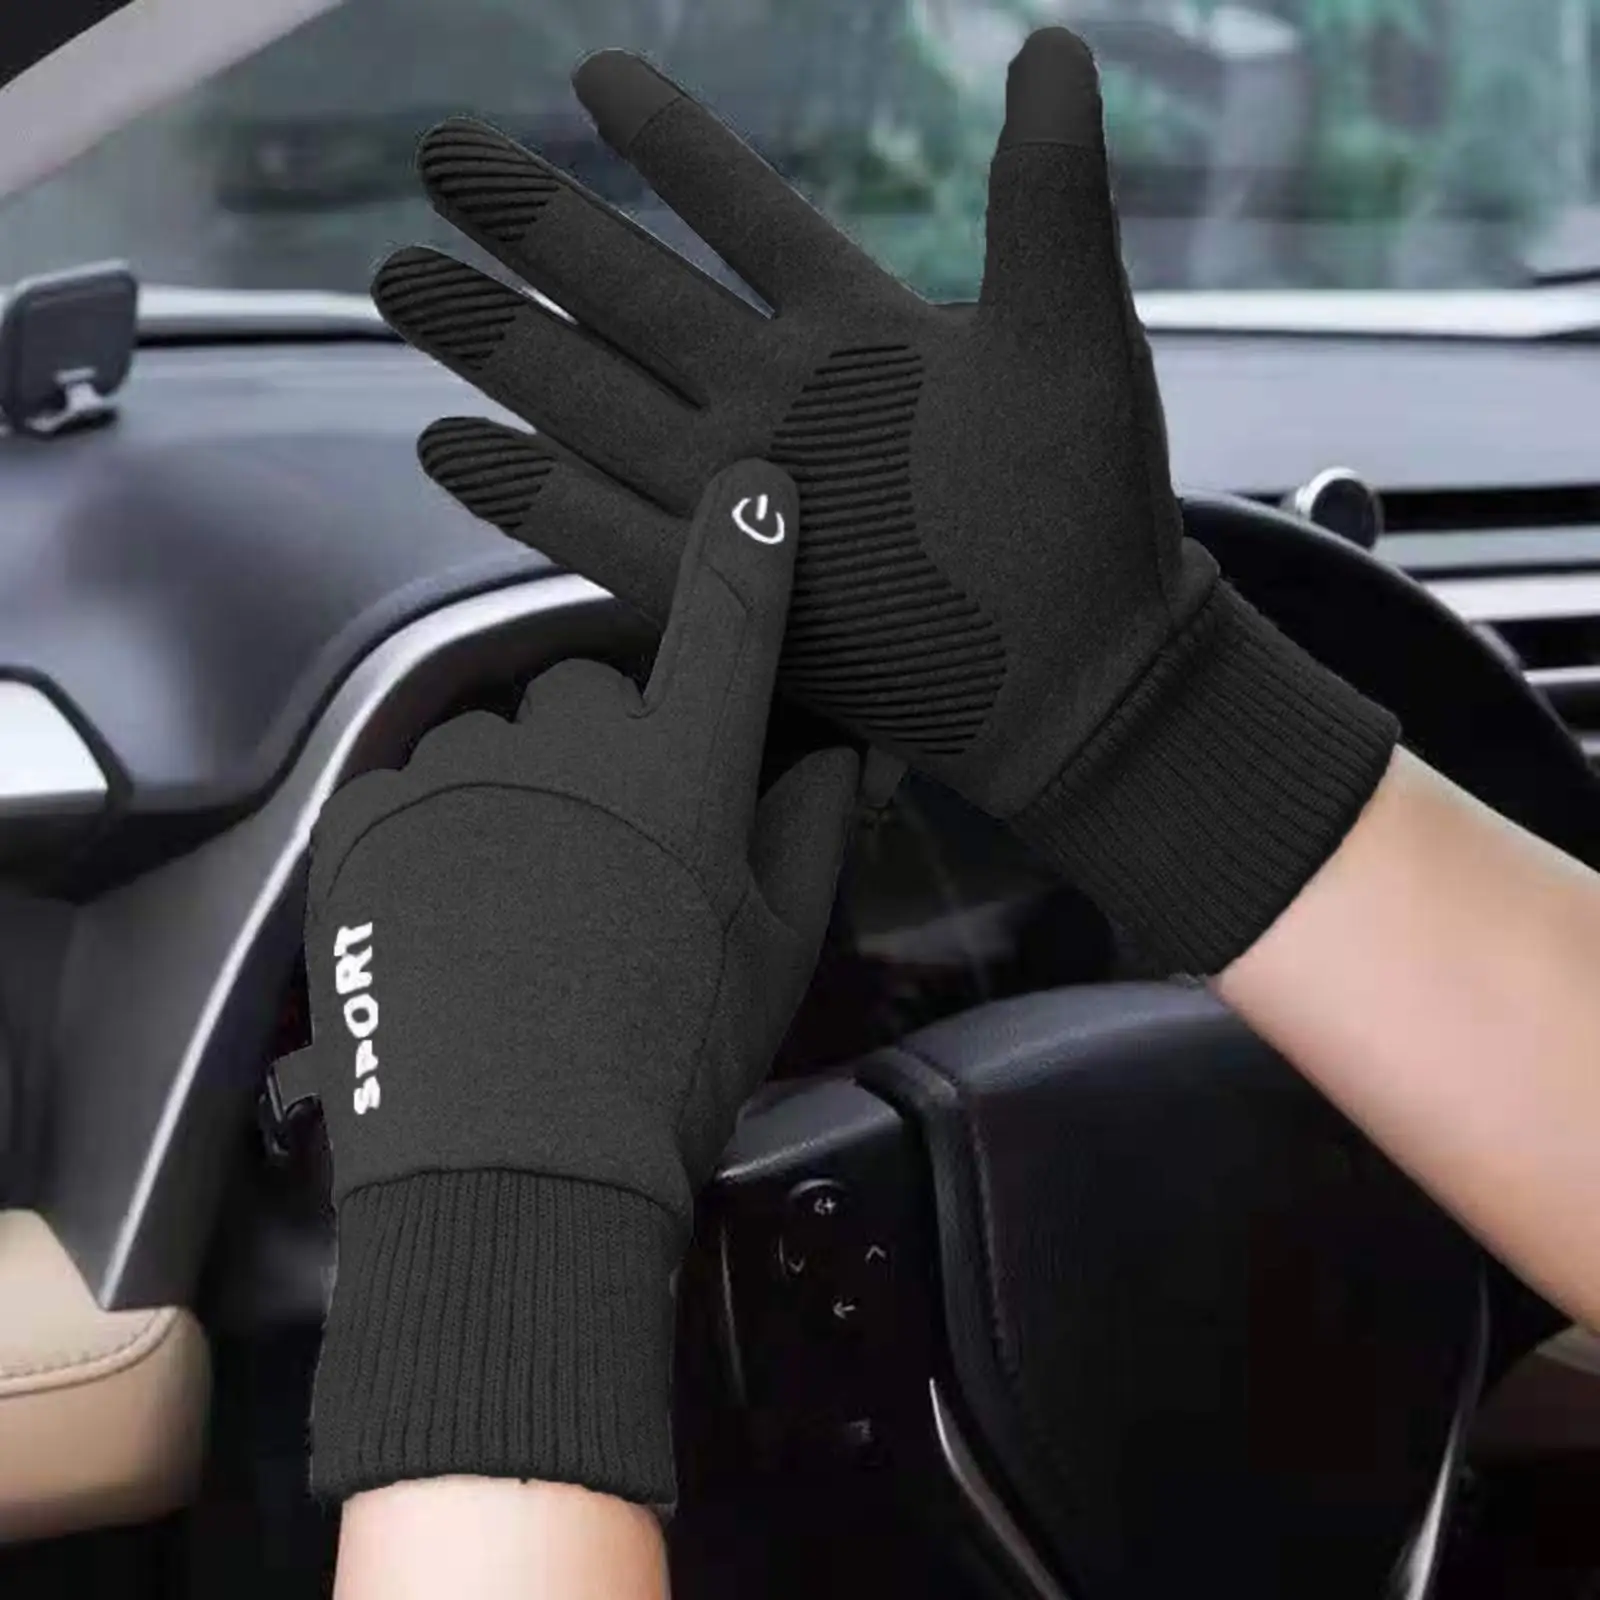 Warm Gloves Durable Weather Resistant Fashion Non Slip Comfortable Cycling Gloves for Outdoor Driving Cycling Hiking